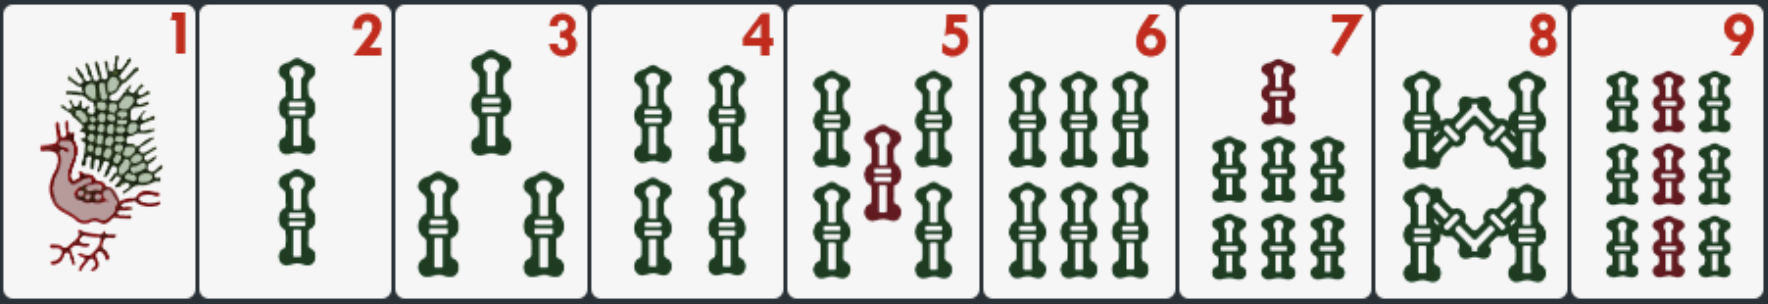 Simple Mahjong Rules for Three or Four Players - HobbyLark